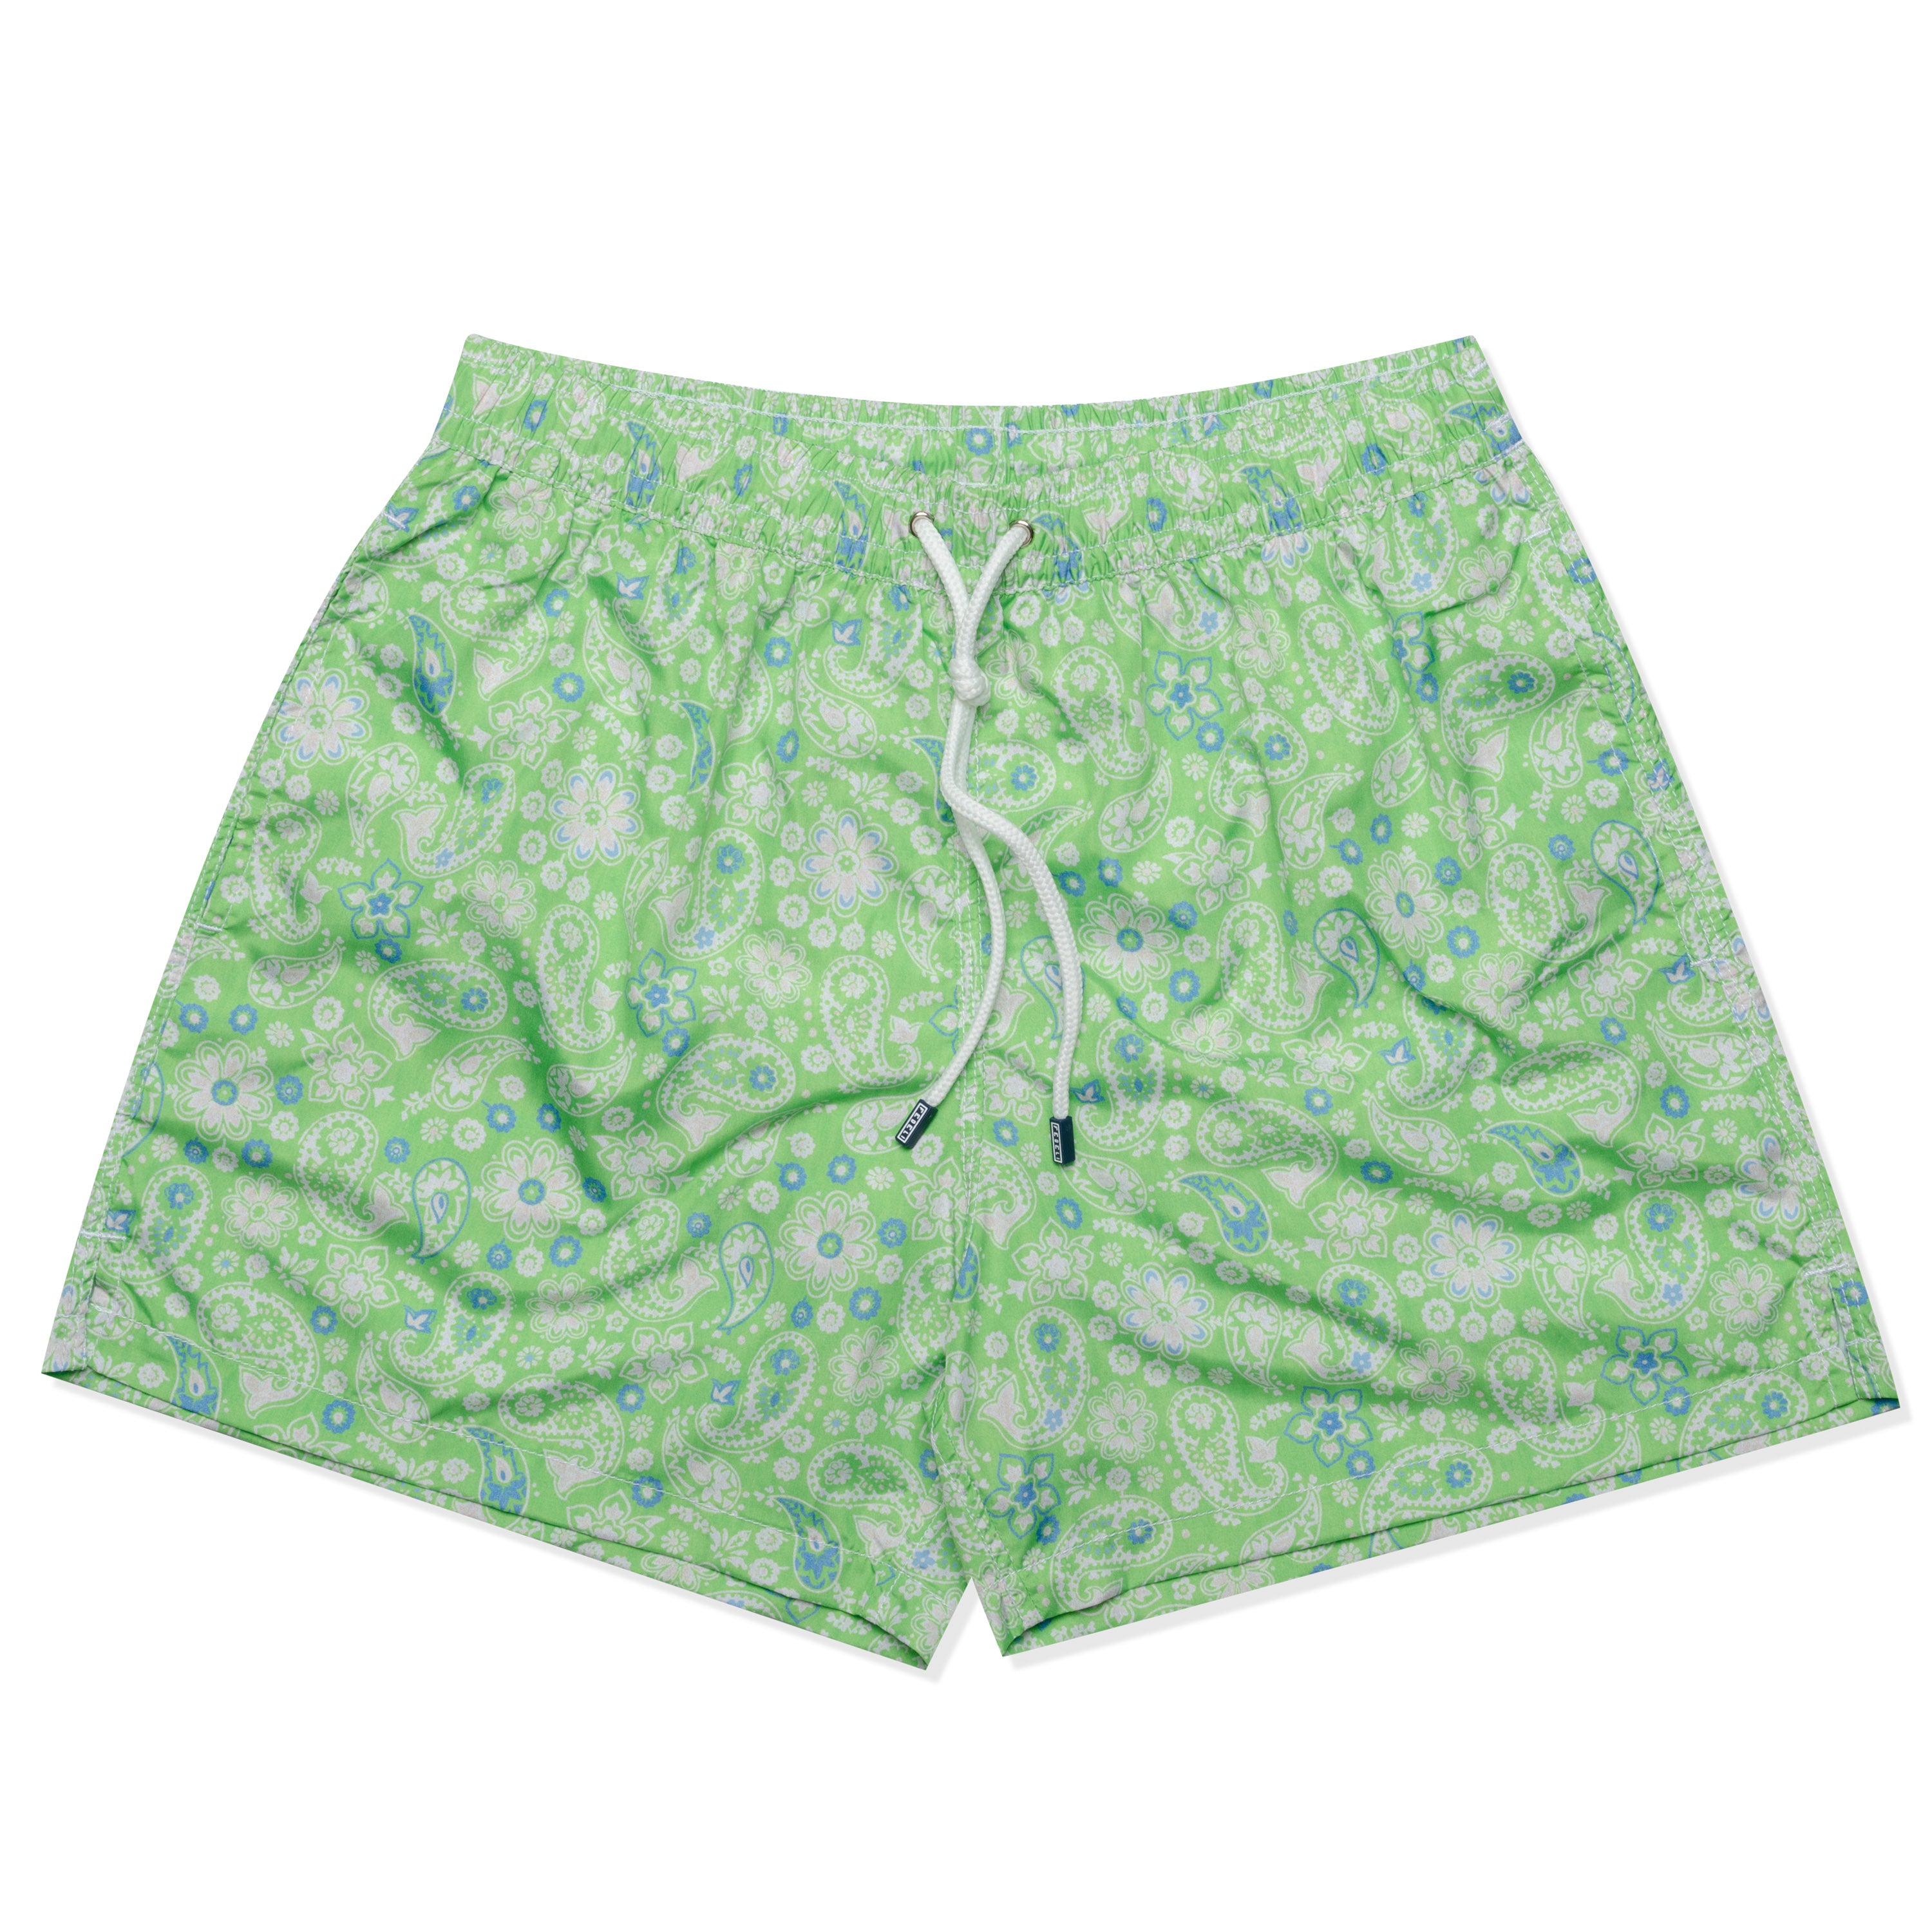 FEDELI Green Floral Paisley Printed Madeira Airstop Swim Shorts Trunks NEW 2XL FEDELI